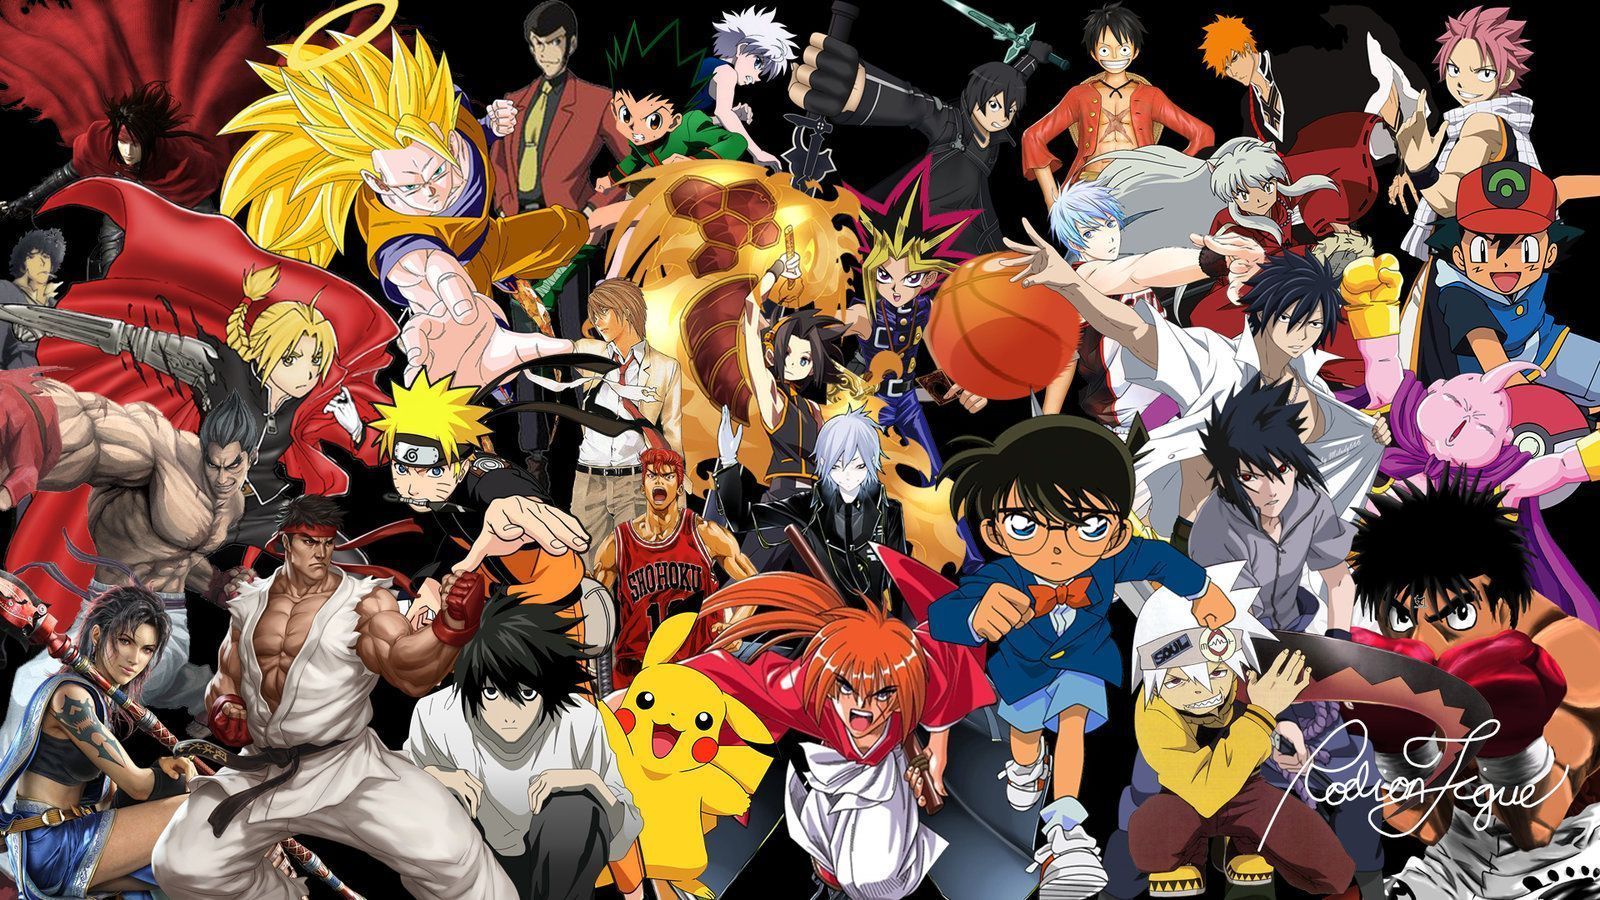 Anime Collage Wallpaper Free Anime Collage Background - Anime, Awesome anime, Collage background